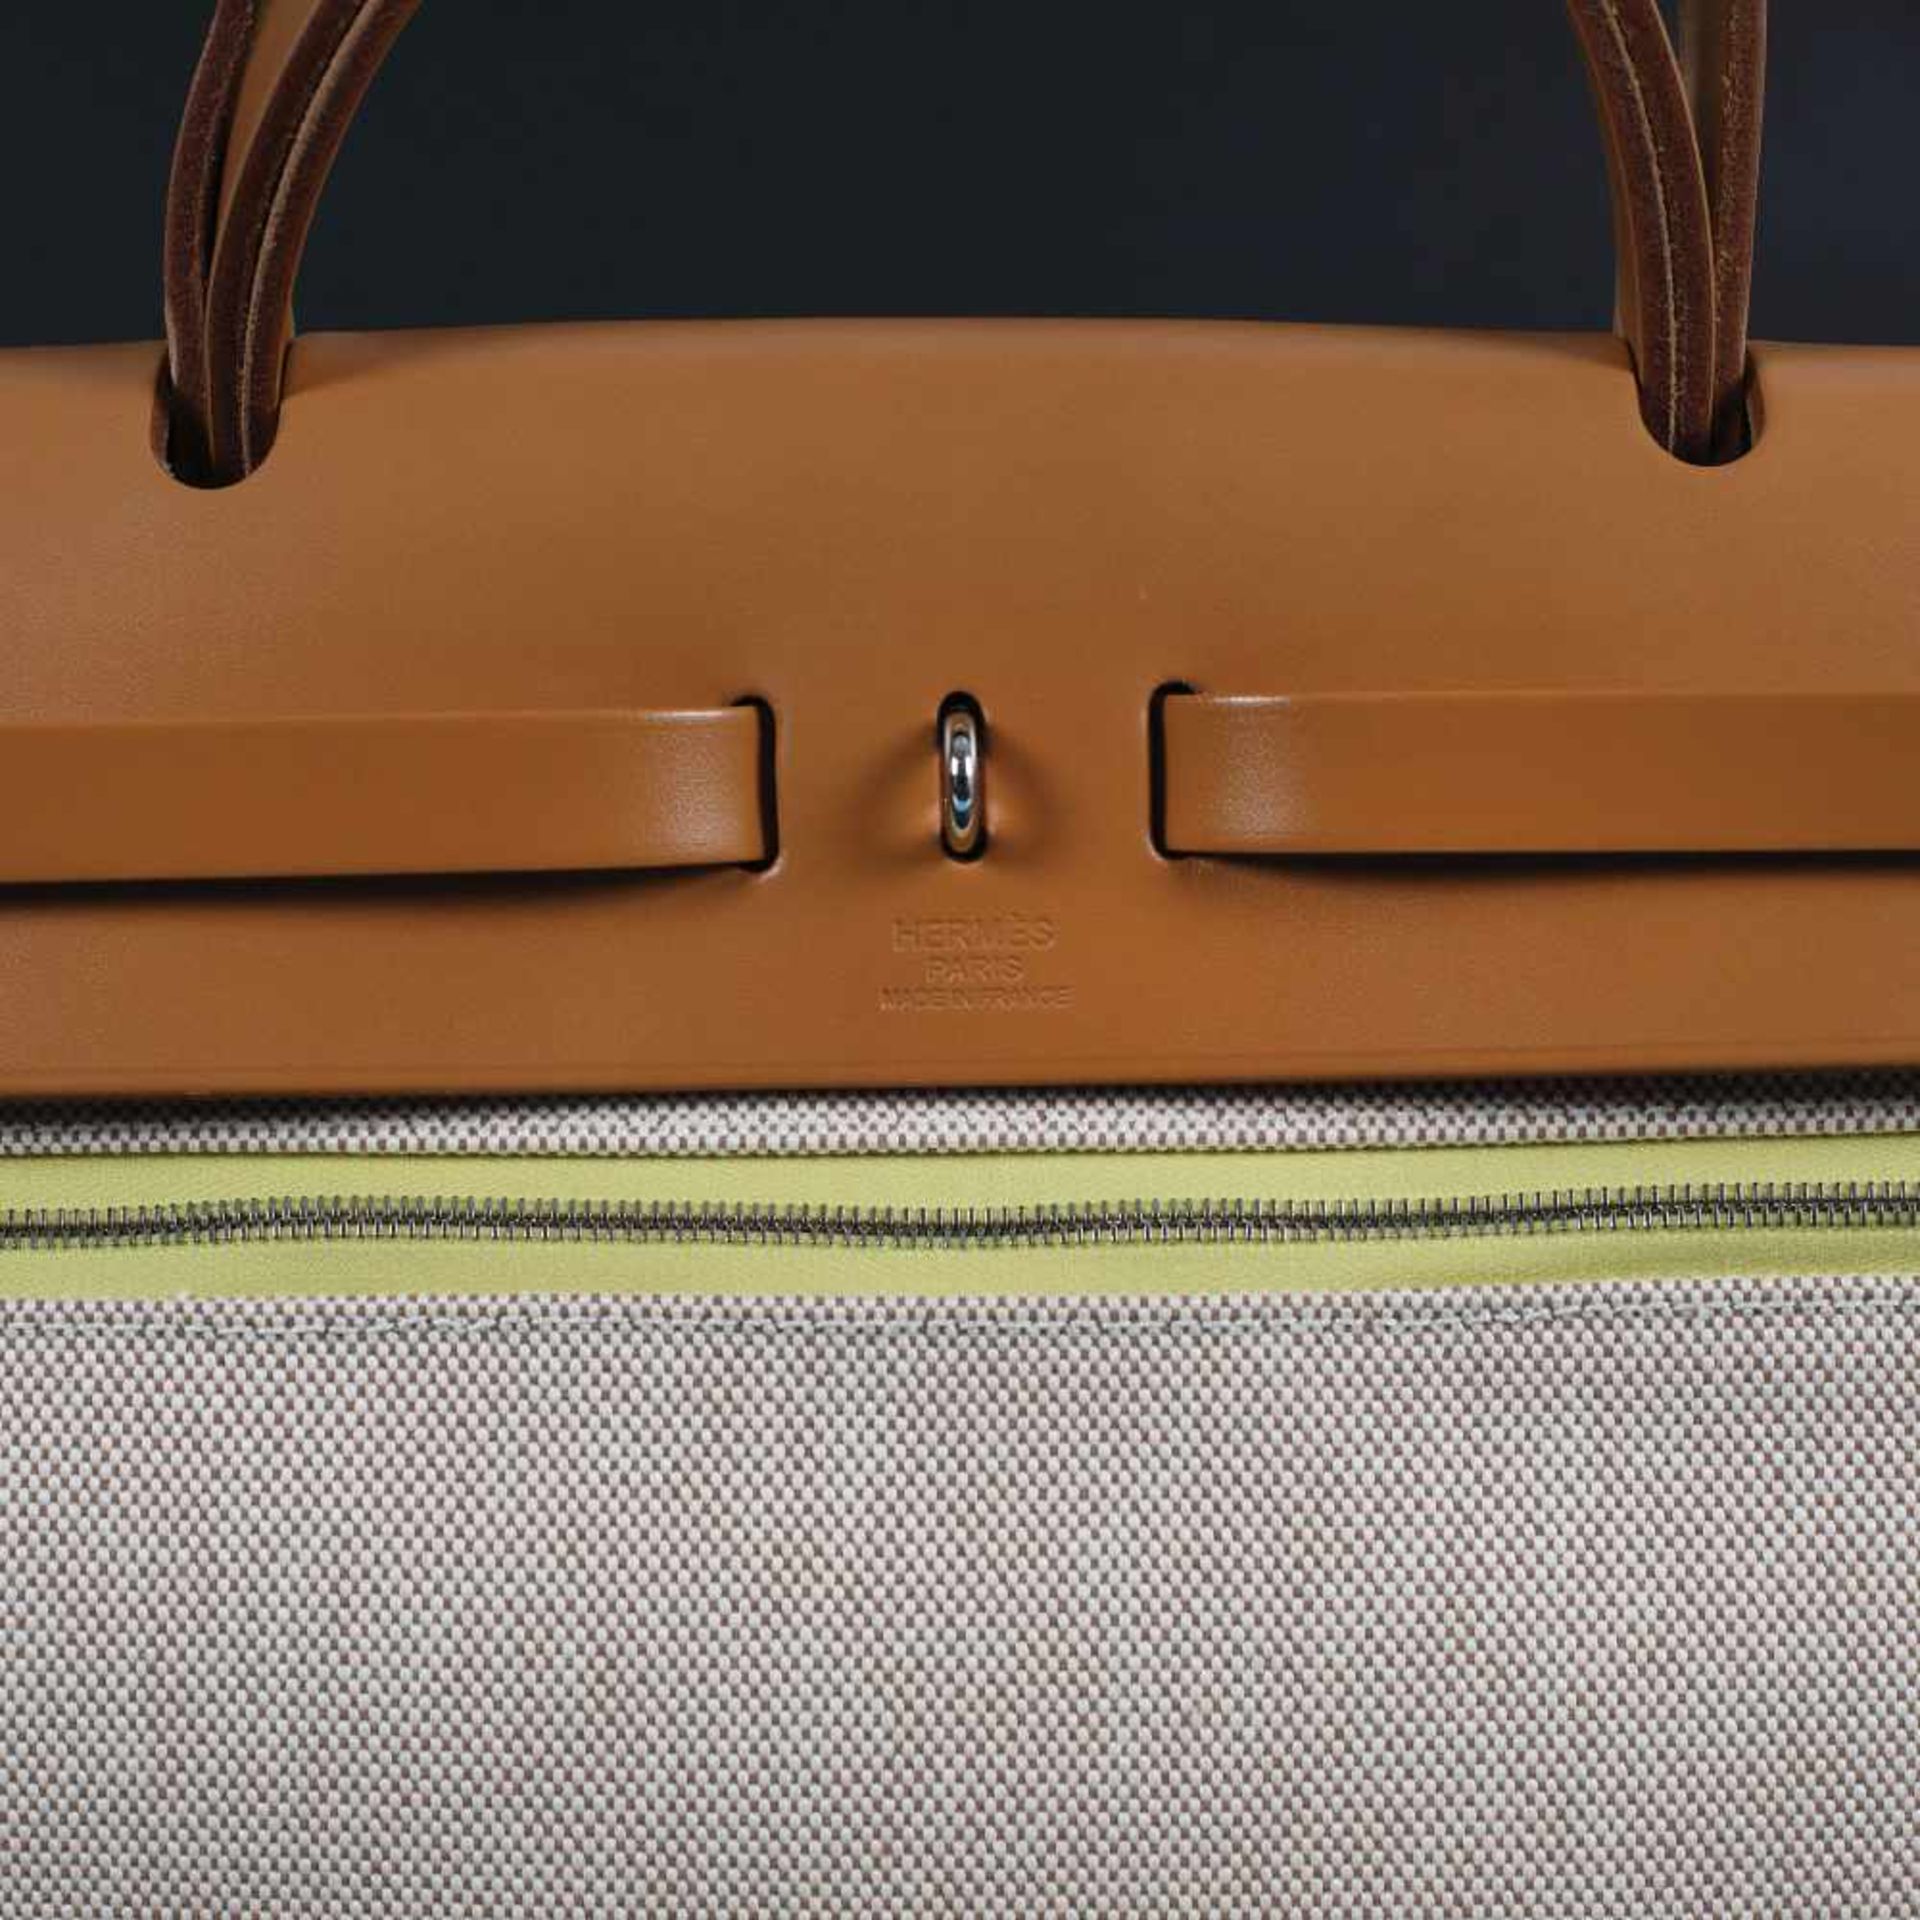 "Herbag Zip 31" - Hermès bag, textile and leather, colour Lime, for women, accompanied by documents - Bild 6 aus 6